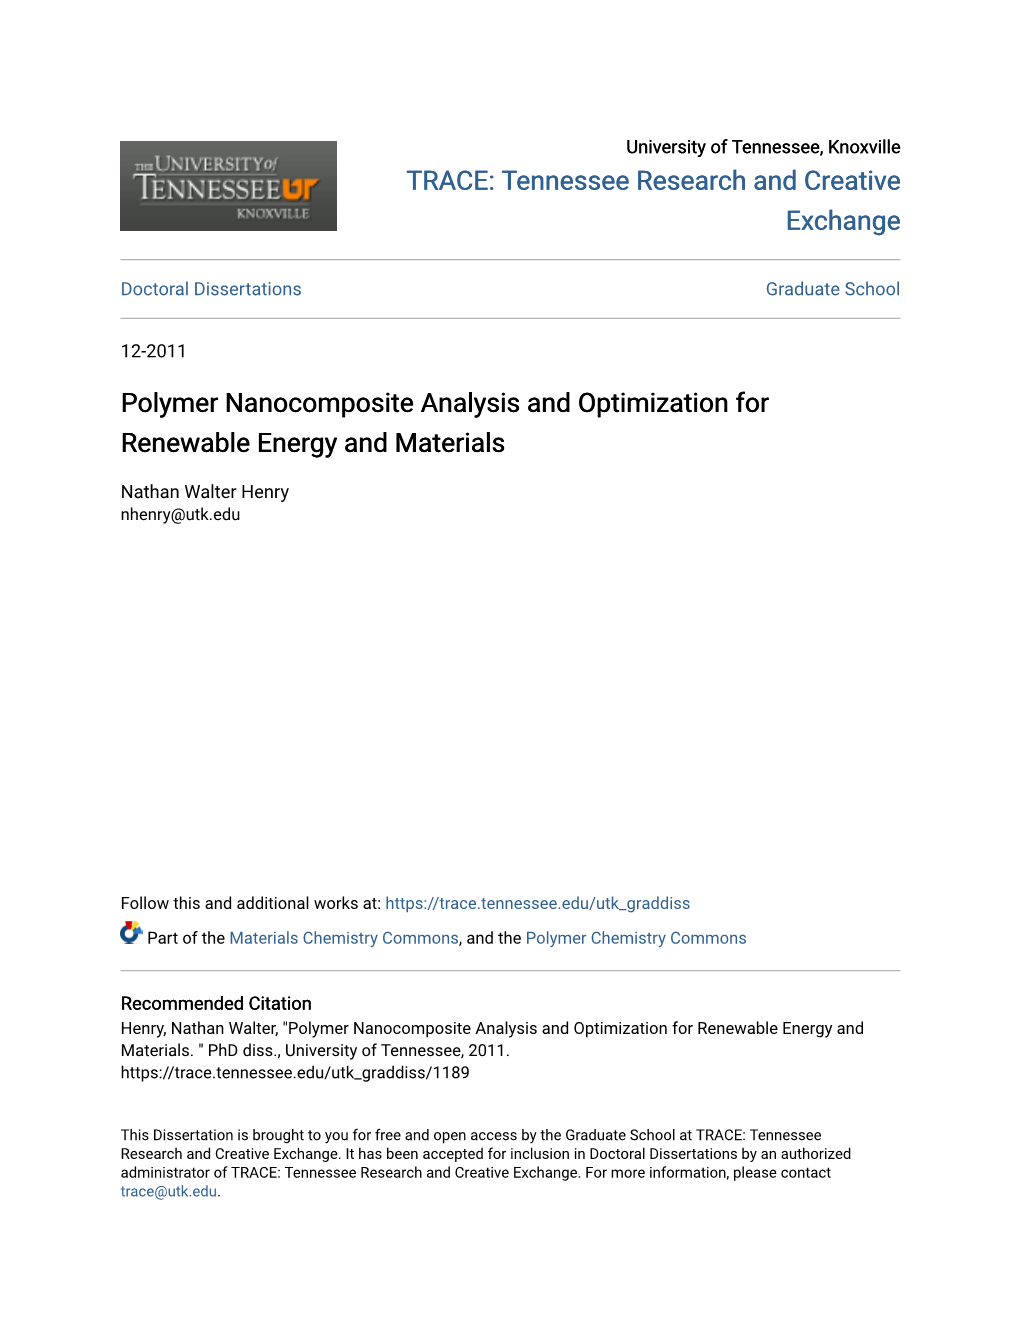 Polymer Nanocomposite Analysis and Optimization for Renewable Energy and Materials